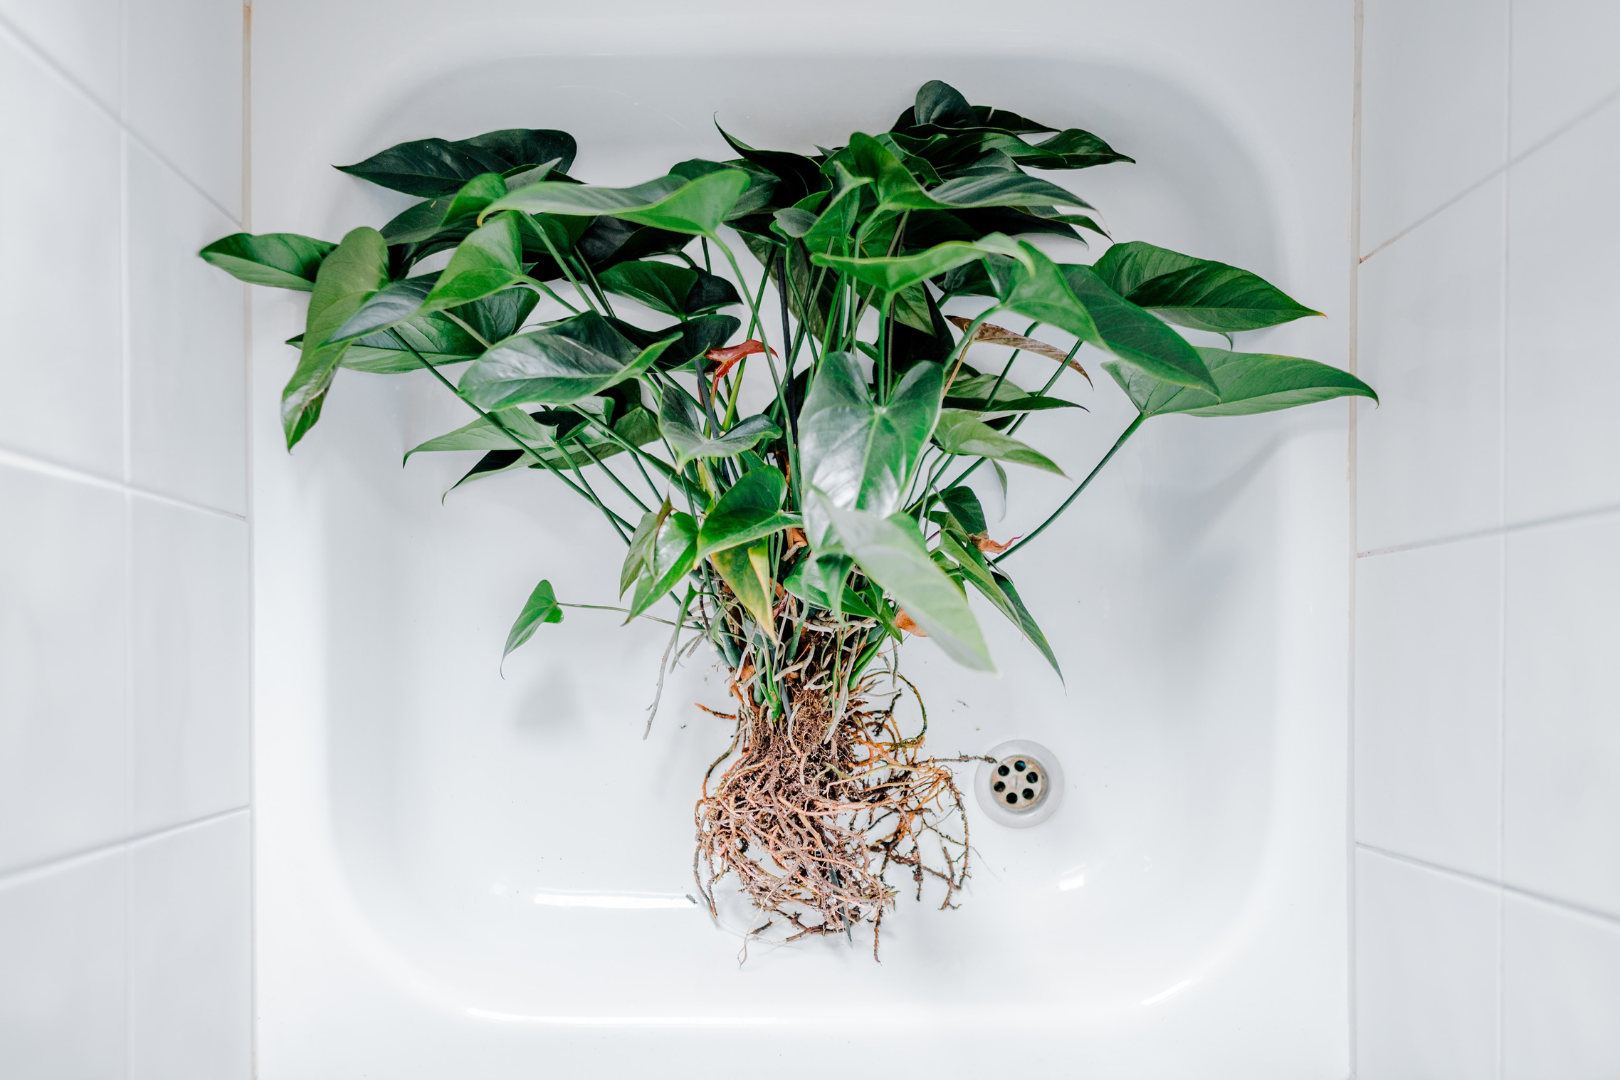 plant growing in bath tub showing roots